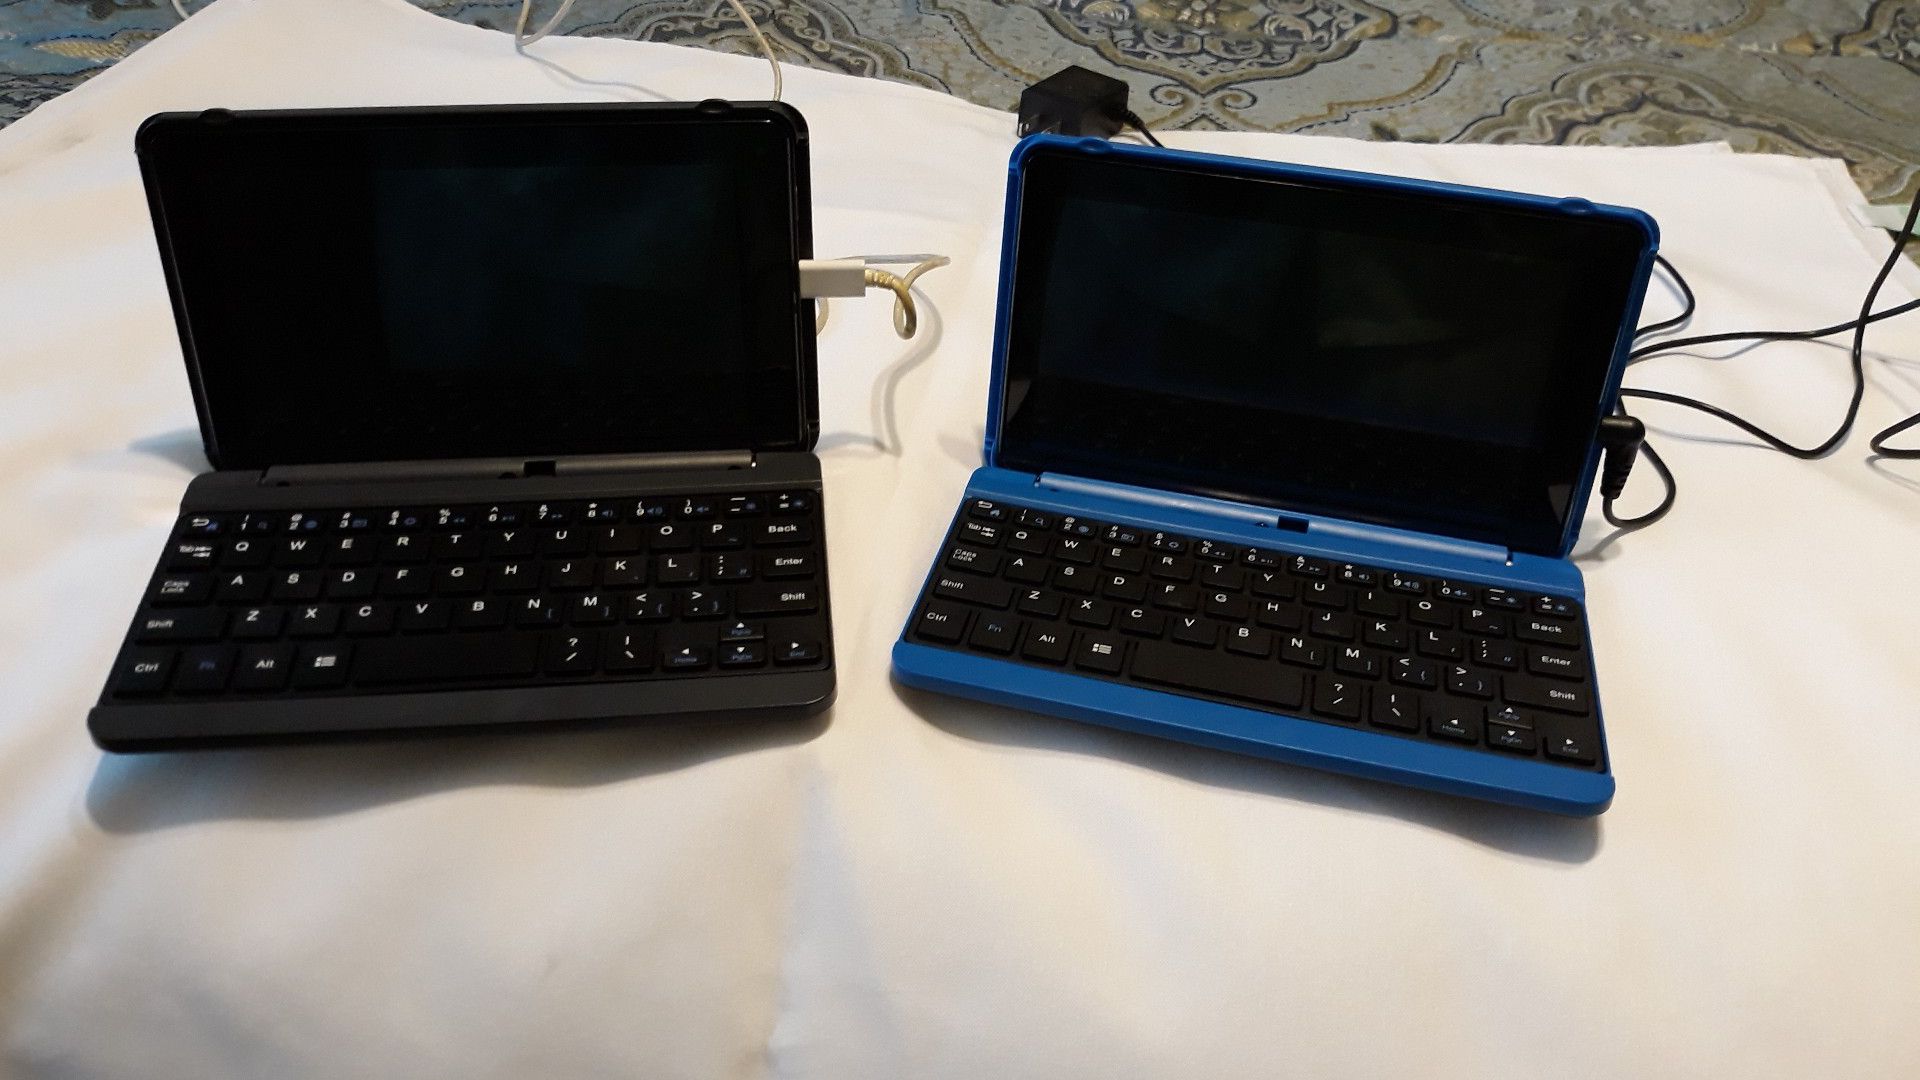 They are each a tablet with a keyboard for $20 each.